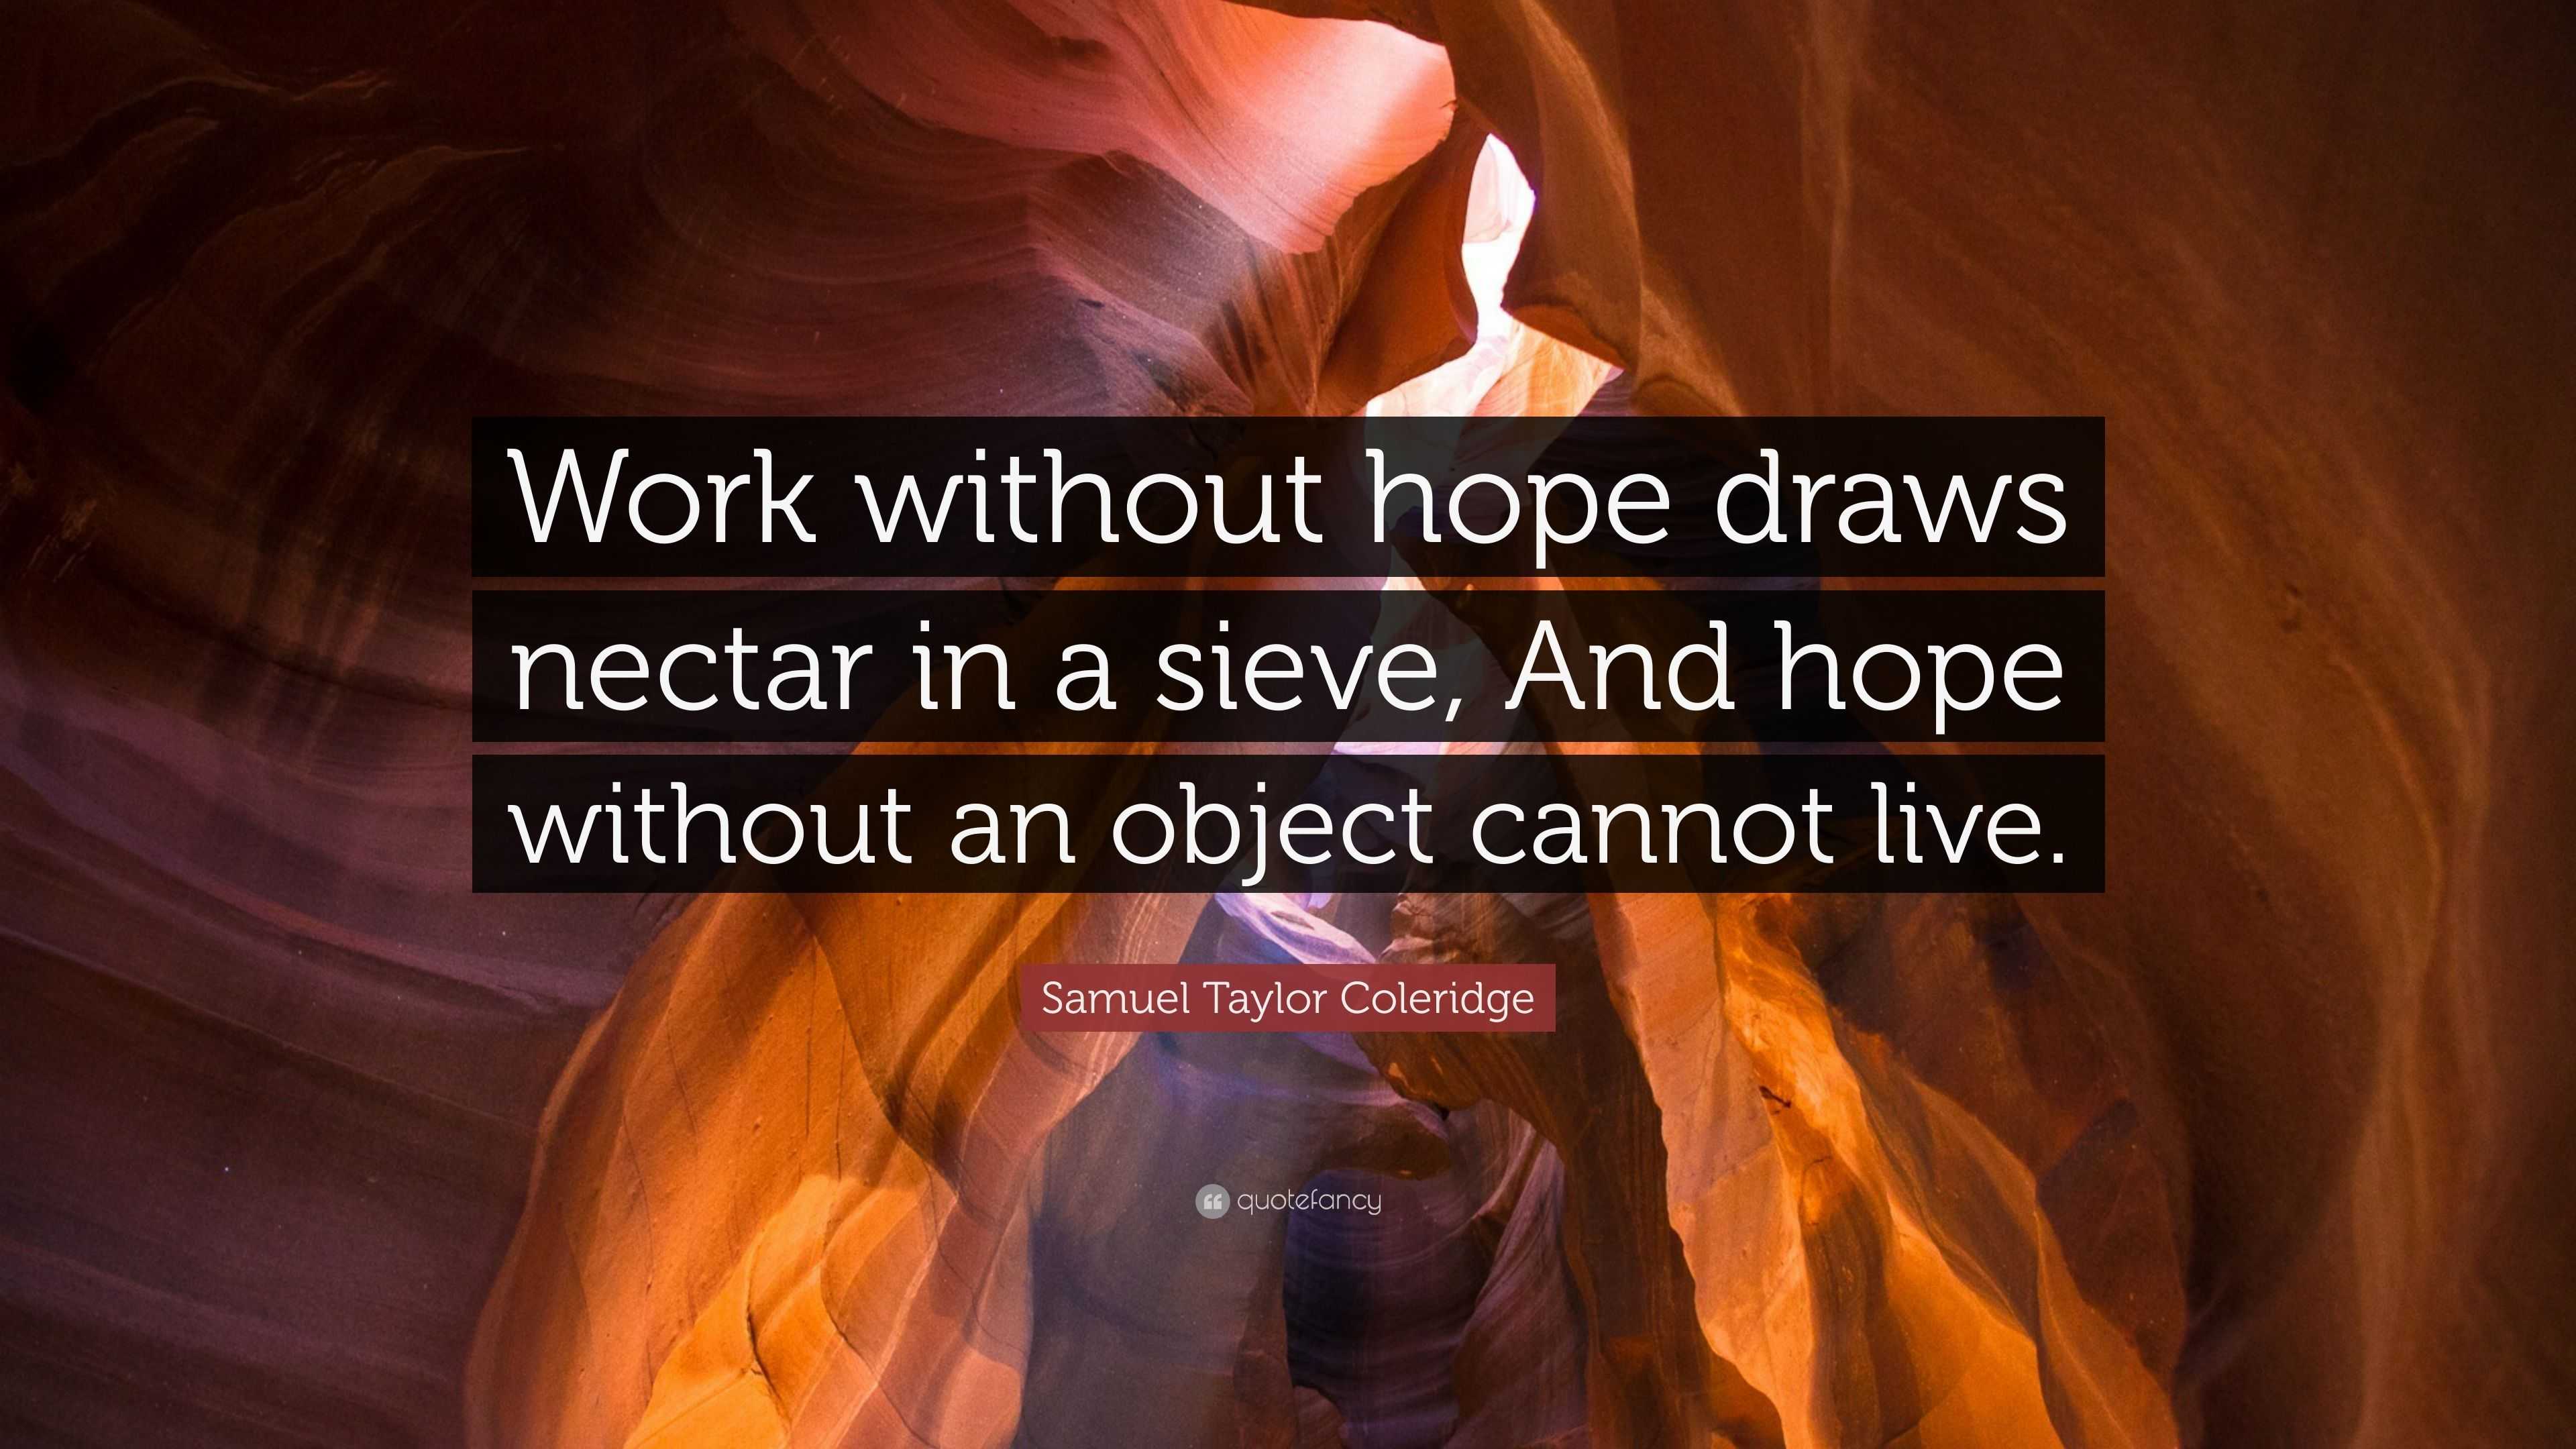 Samuel Taylor Coleridge Quote: “Work without hope draws nectar in a sieve, And hope ...